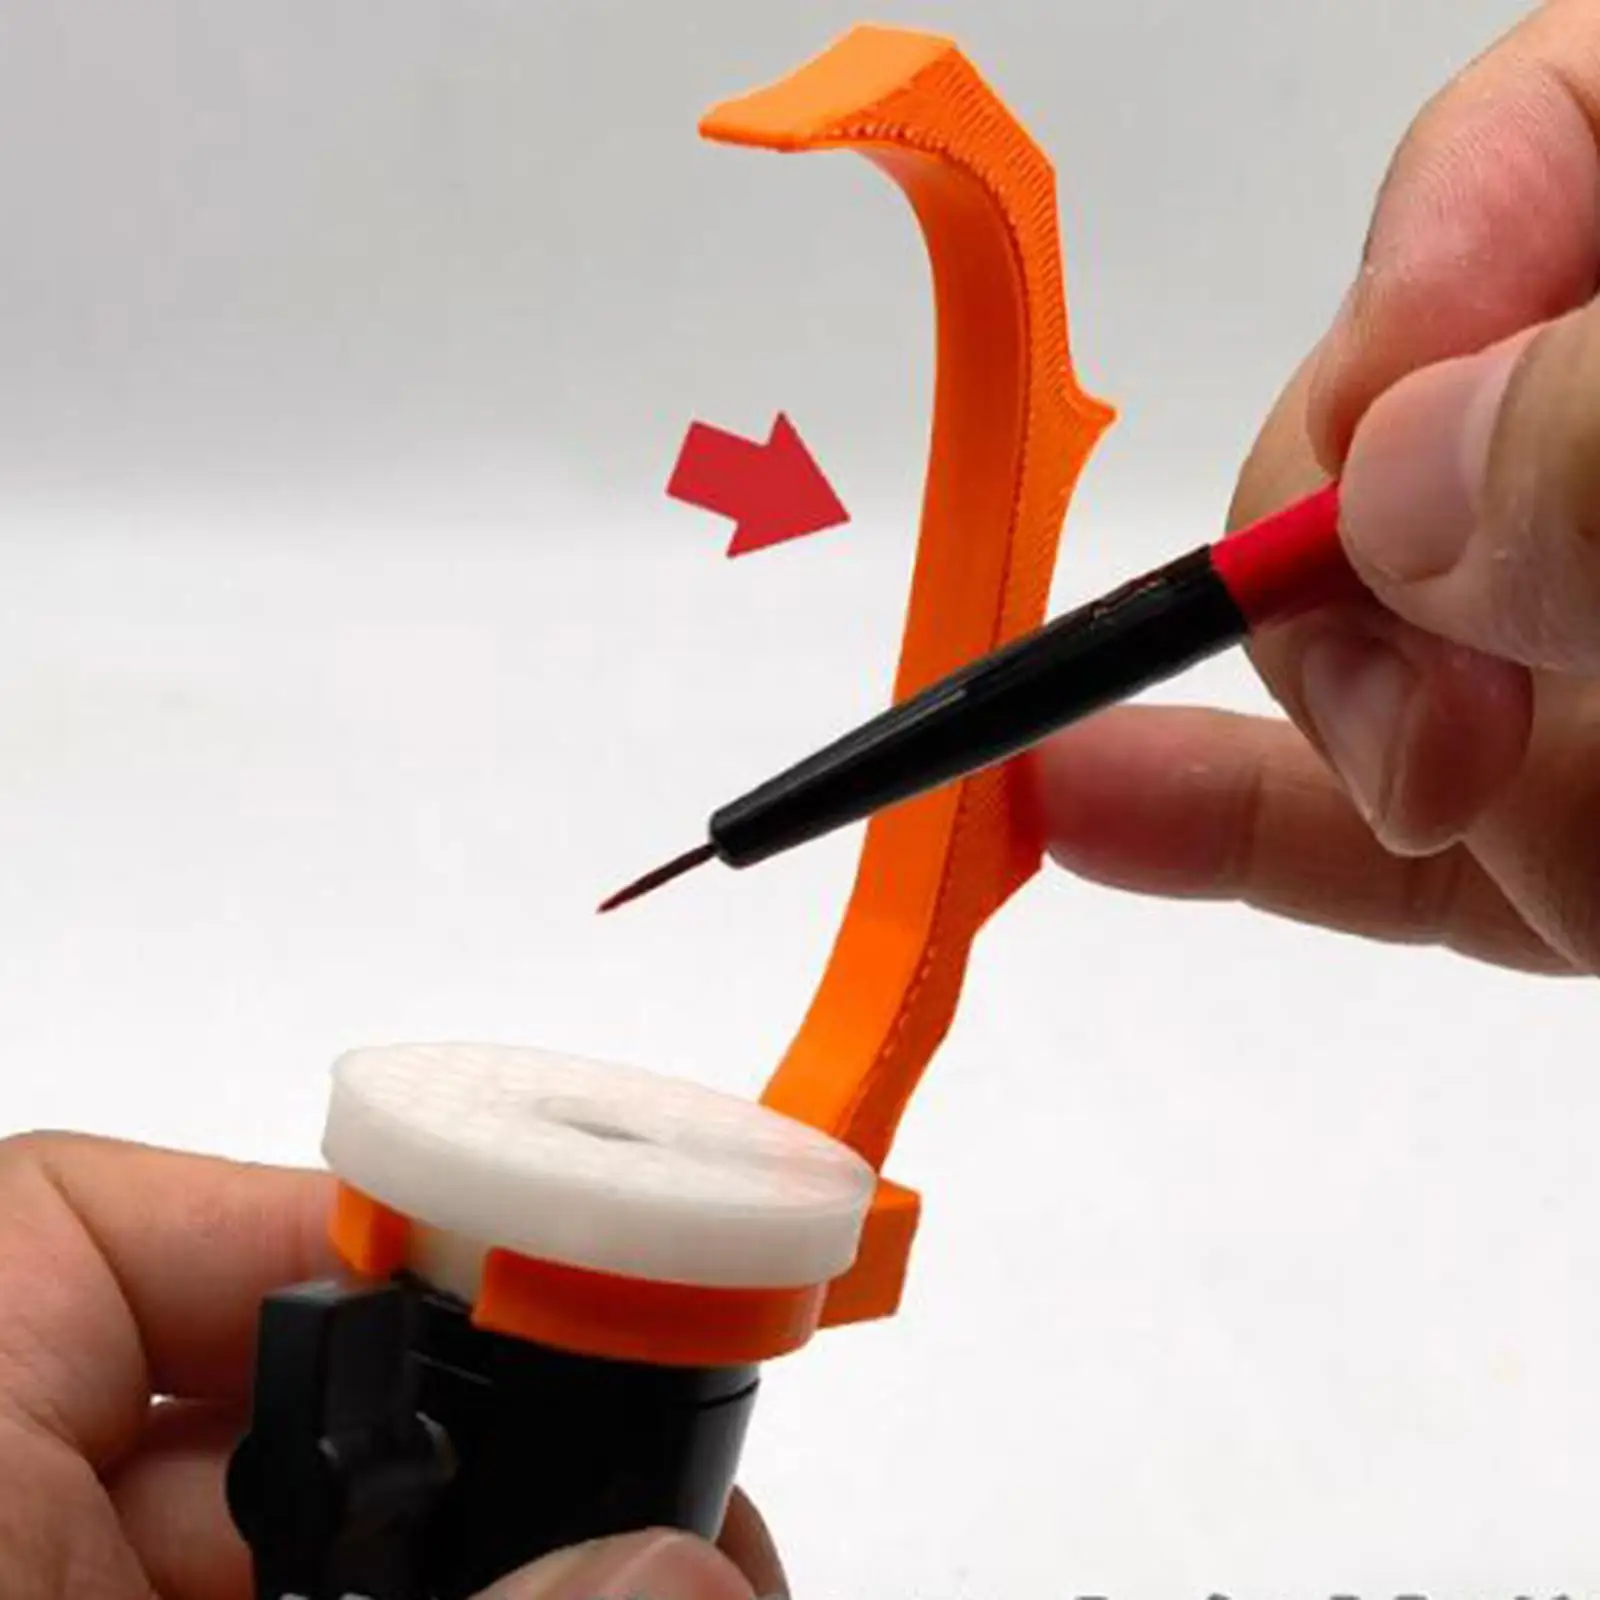 Painting Handle Coloring Holder for Assembling Miniature Models Figurines